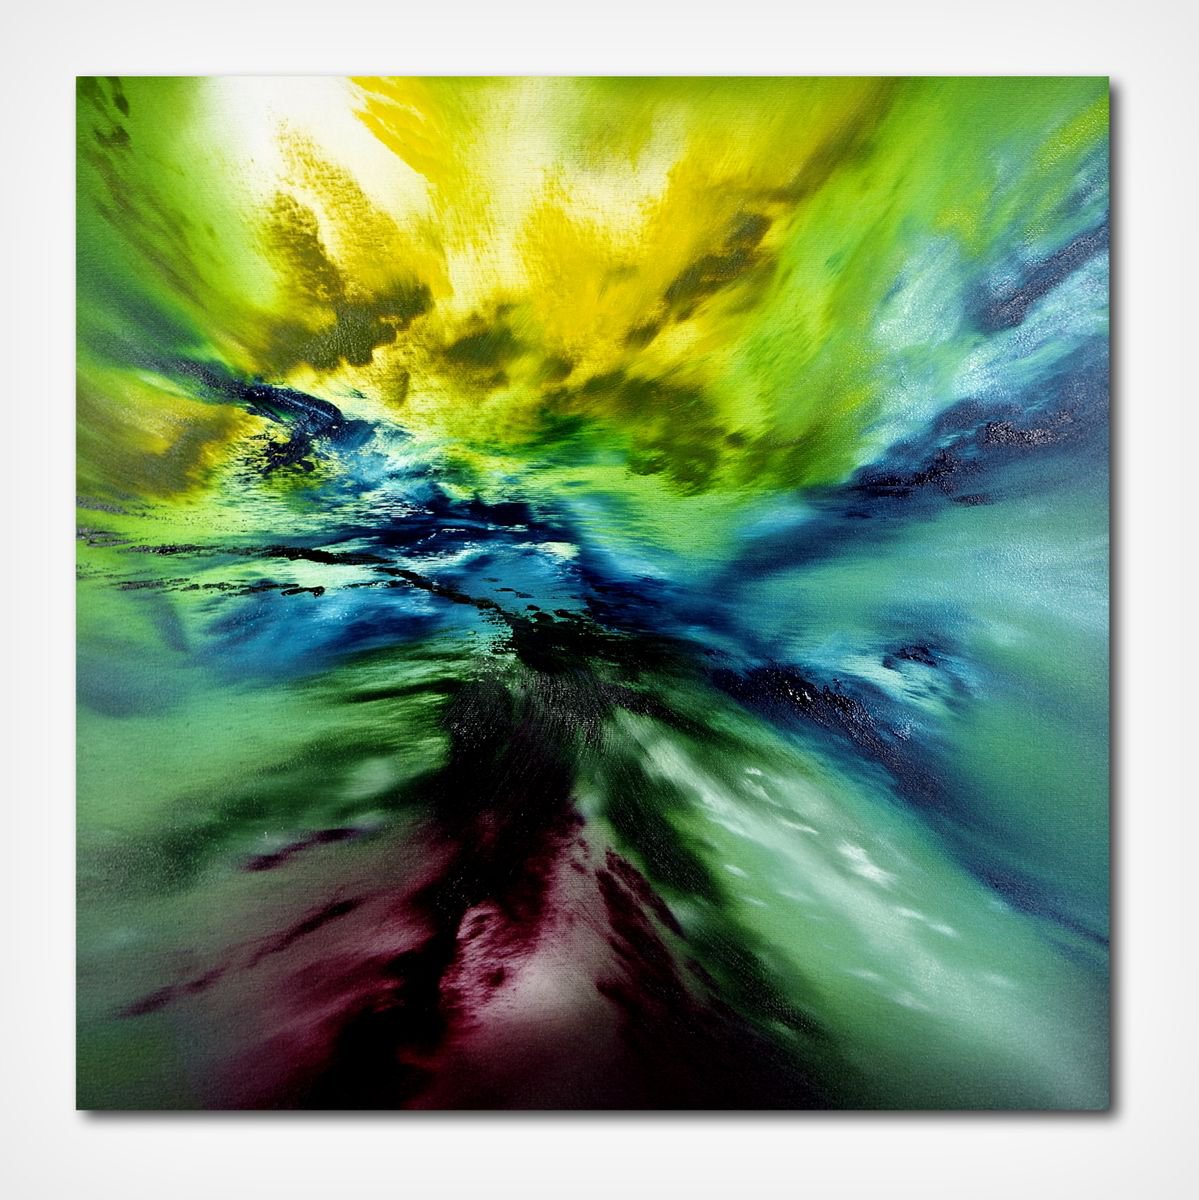 Deepest forest, 60x60 cm, Deep edge, Original abstract painting, oil on canvas by Davide De Palma